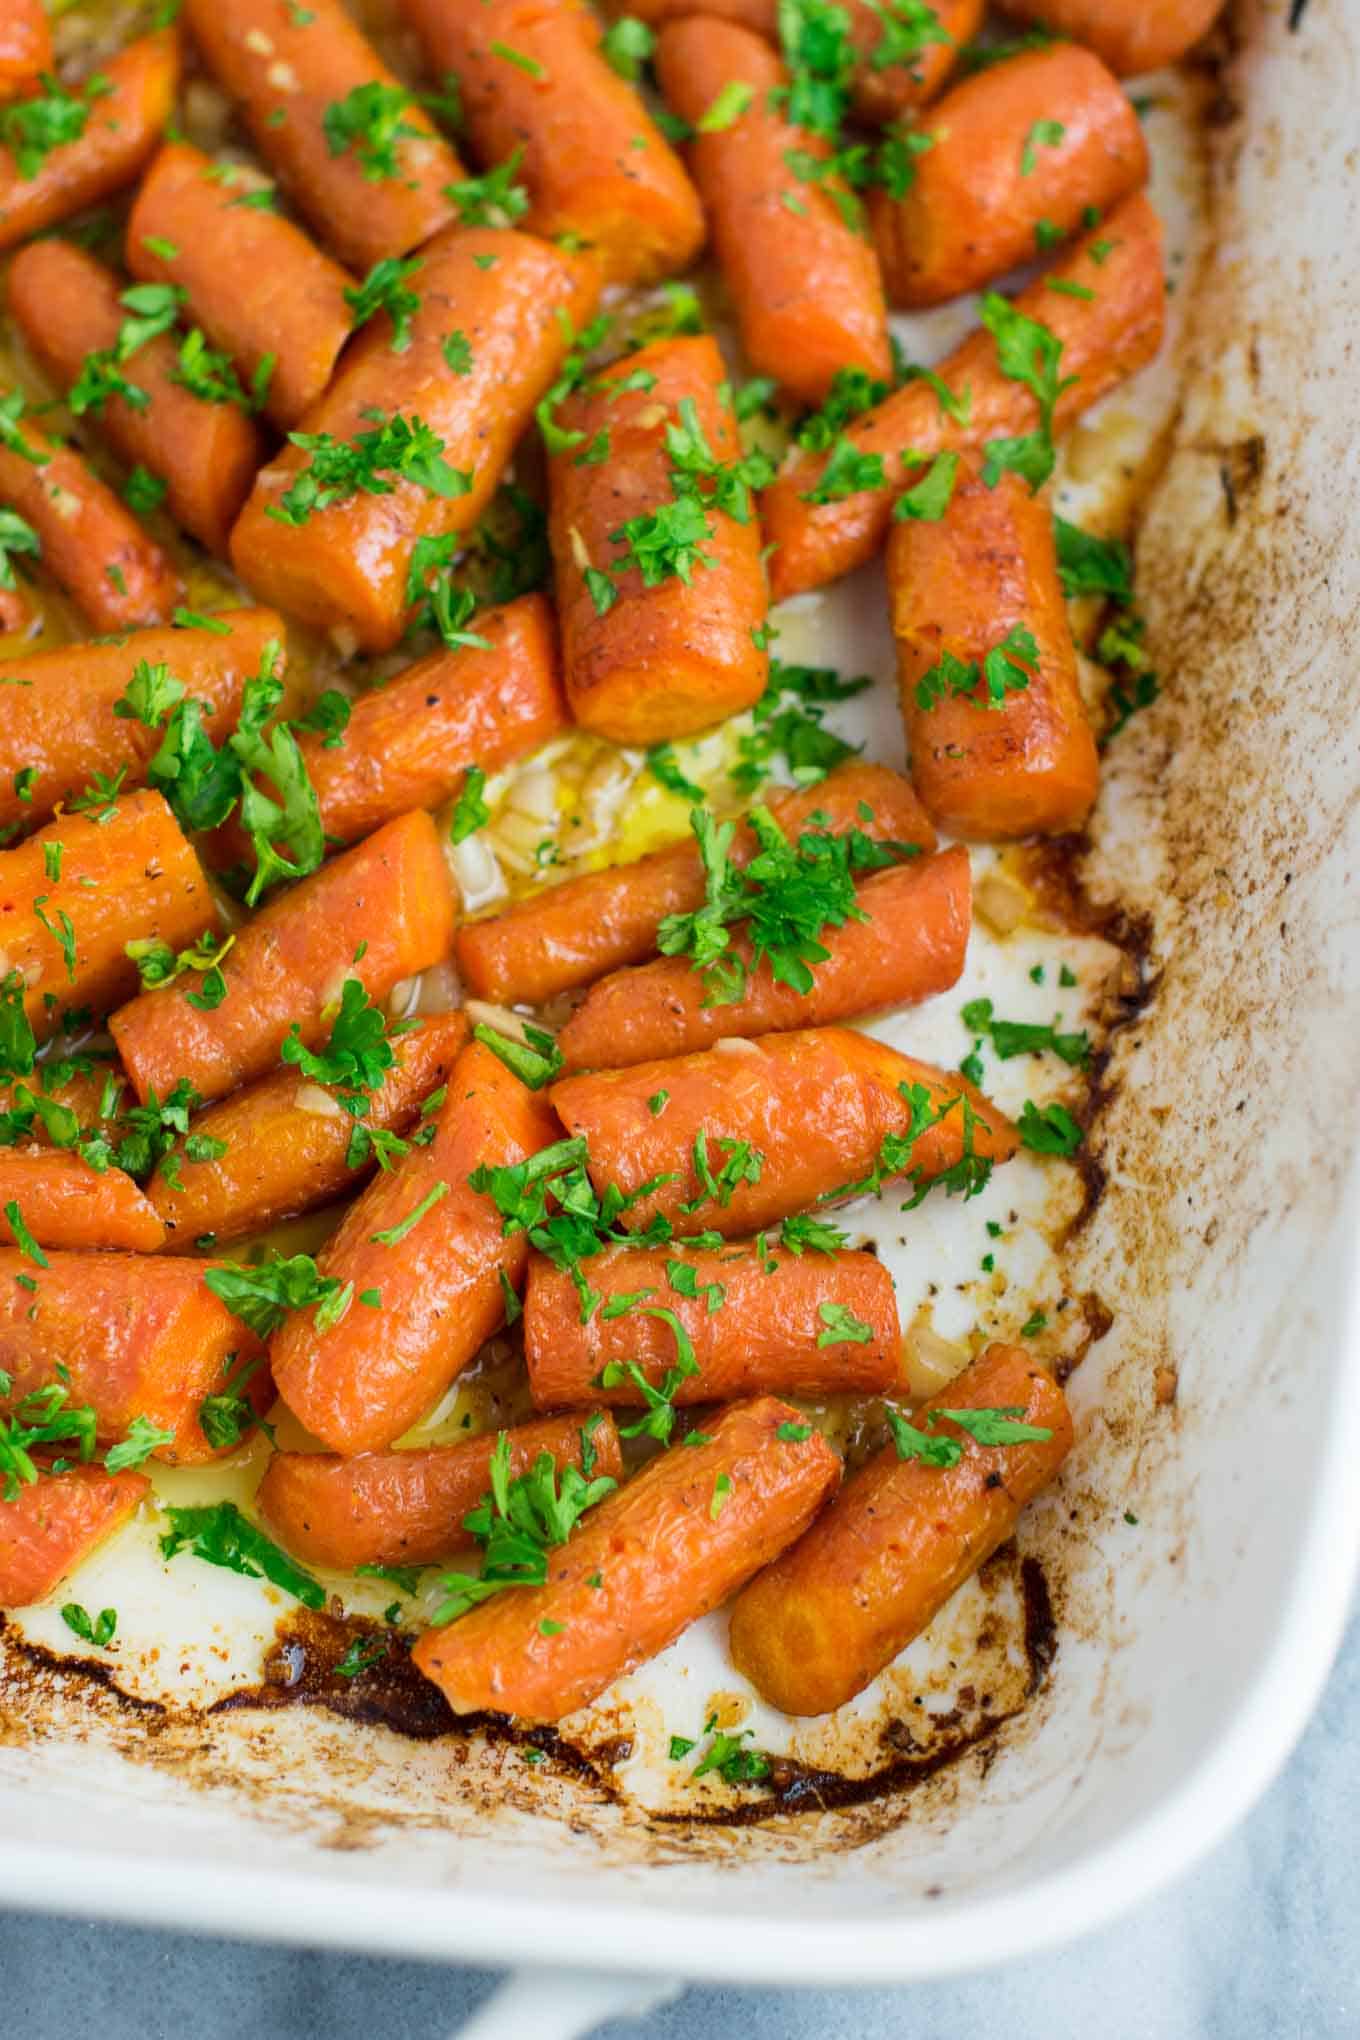 Garlic butter roasted carrots recipe with fresh parsley. A delicious vegan friendly side dish recipe that will disappear in minutes! #vegan #roastedcarrots #garlicbutter #garlicbuttercarrots #sidedishes #vegetables